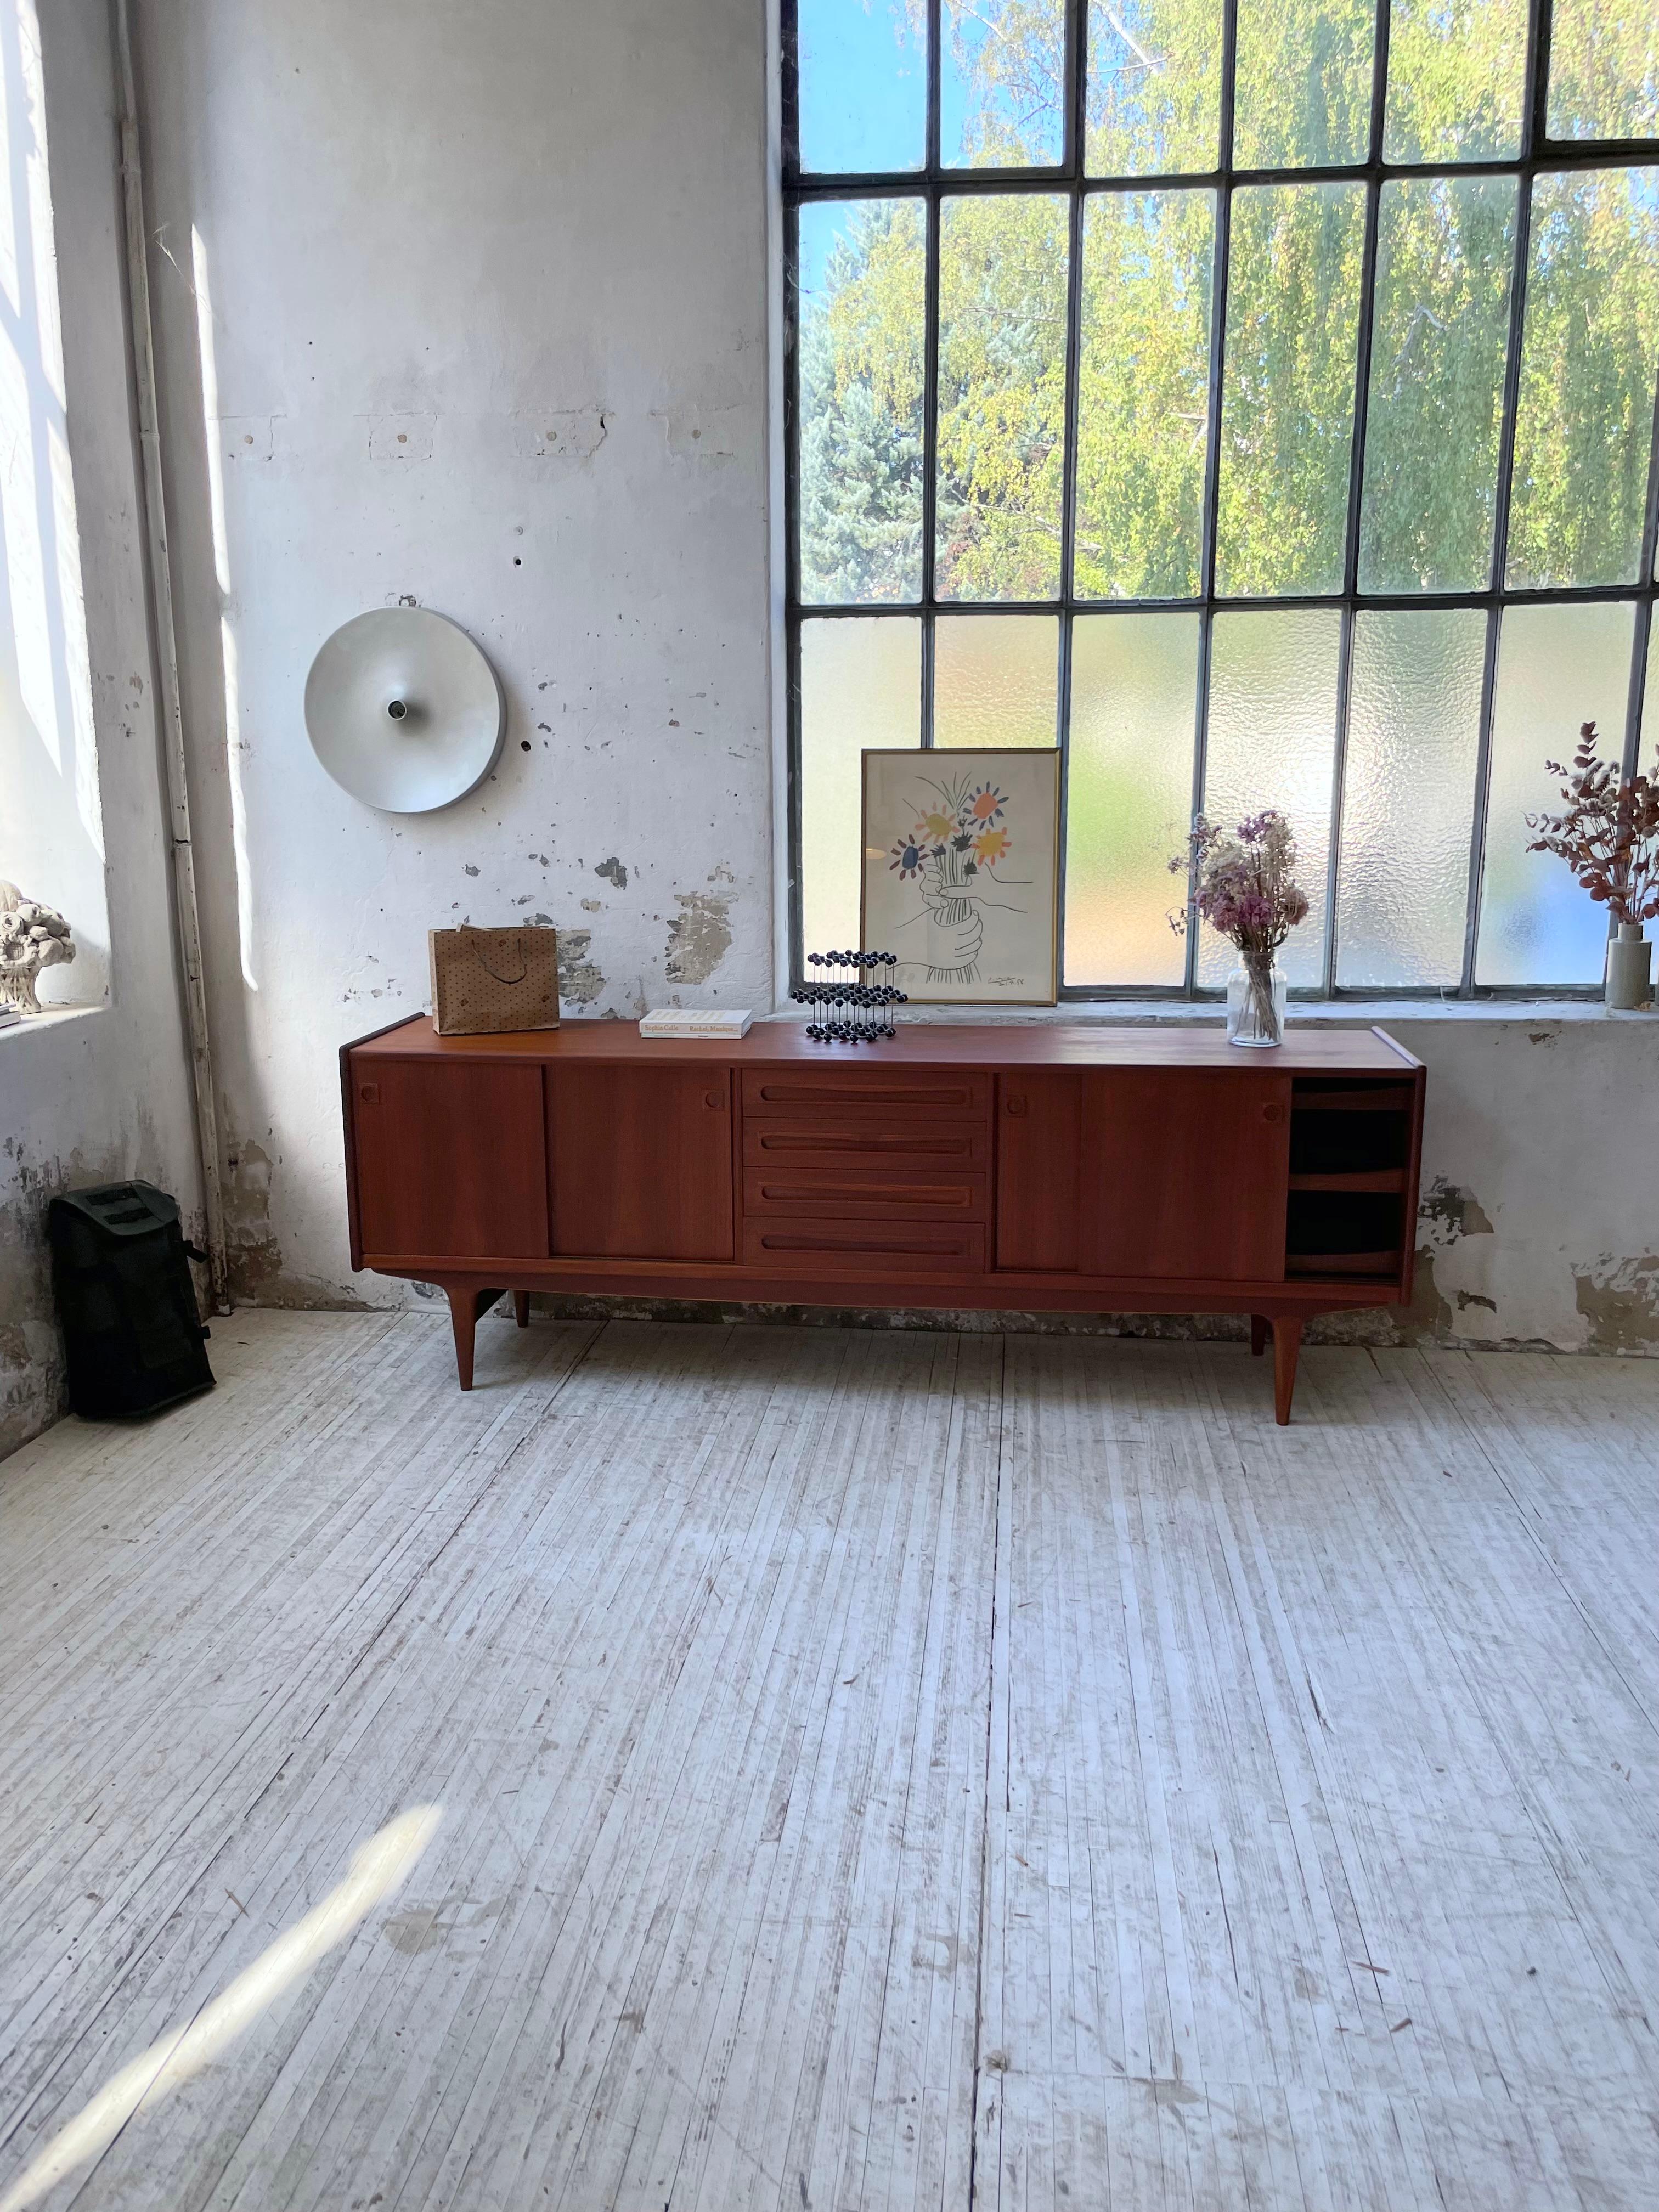 Old teak sideboard from the 60s designed by the famous Danish designer Johannes Andersen, and produced by Samcom.
This sideboard has been completely restored, sanded, treated and oiled. She has regained all her letters of nobility and the beautiful